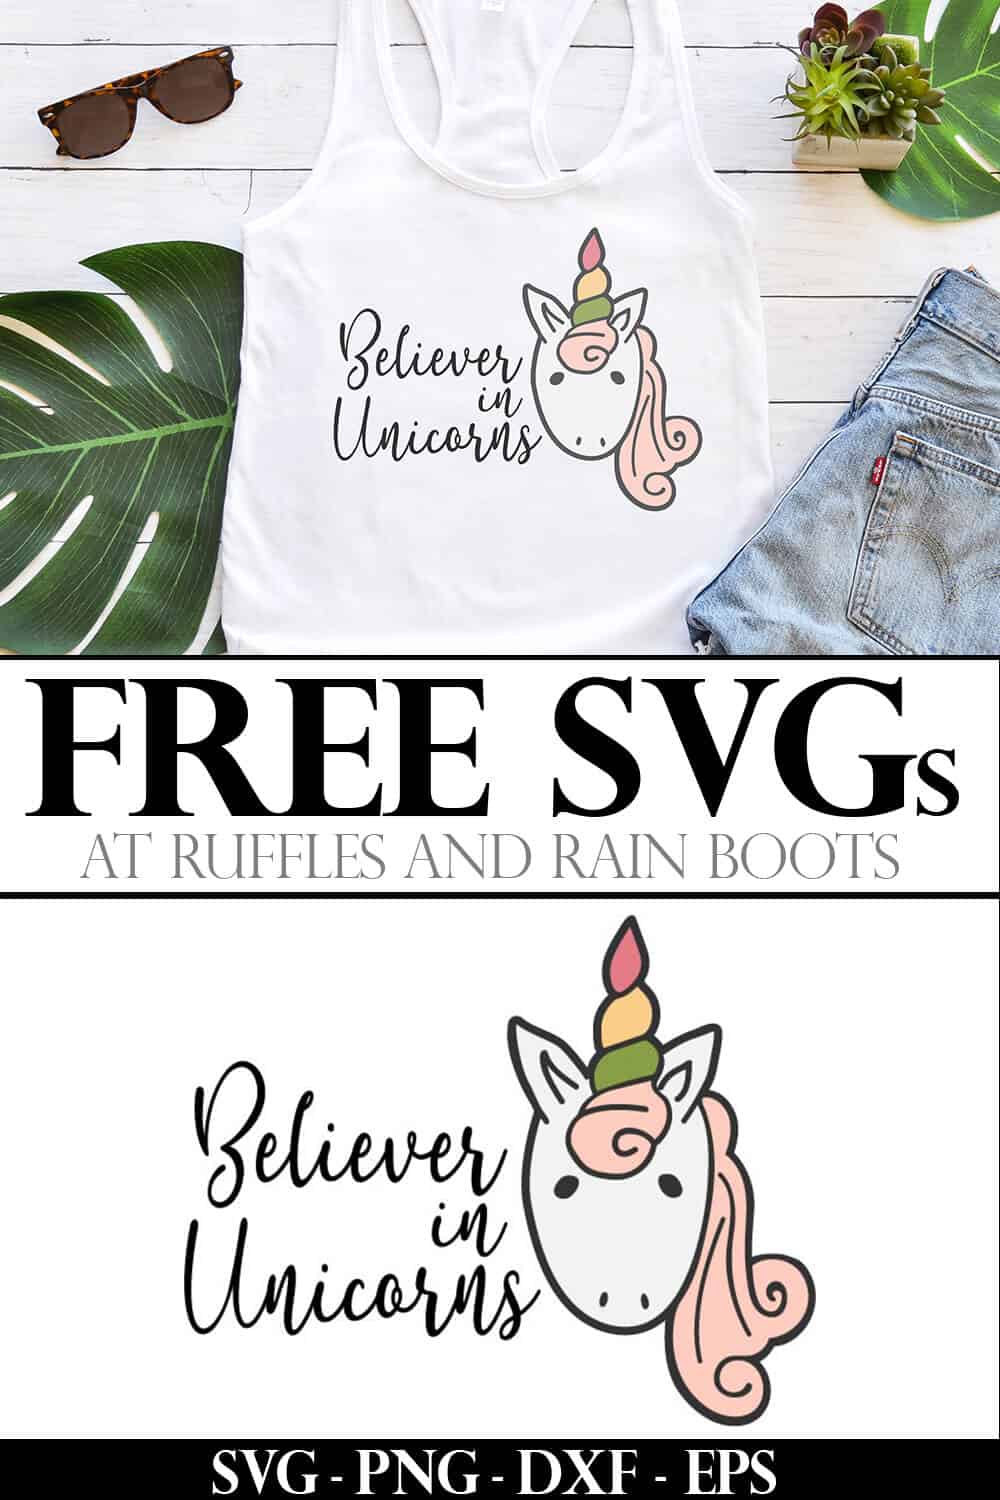 Believer in Unicorns free unicorn cut file on tank top with text which reads free svgs